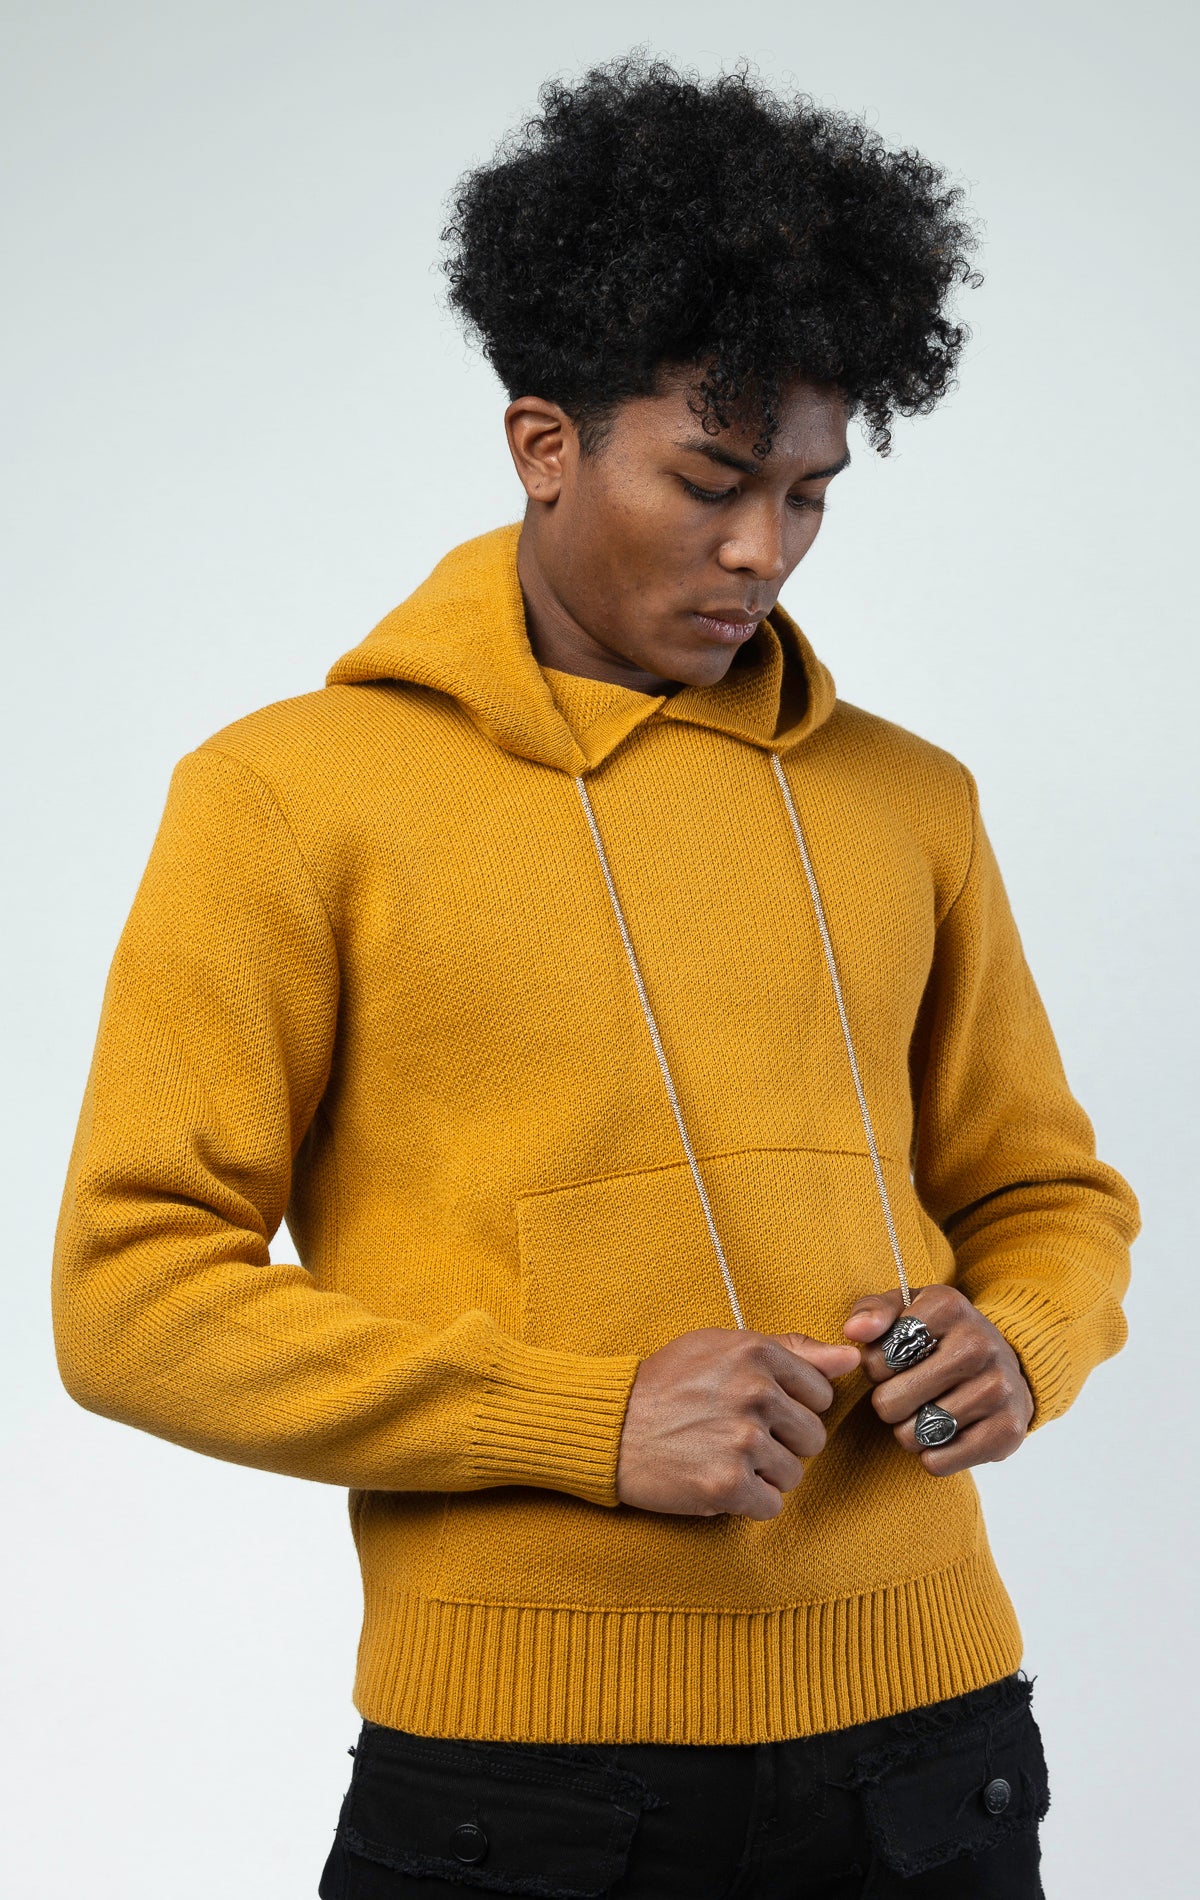 Wheat Luxury sweater hoodie with crystal strings in wheat and black color.